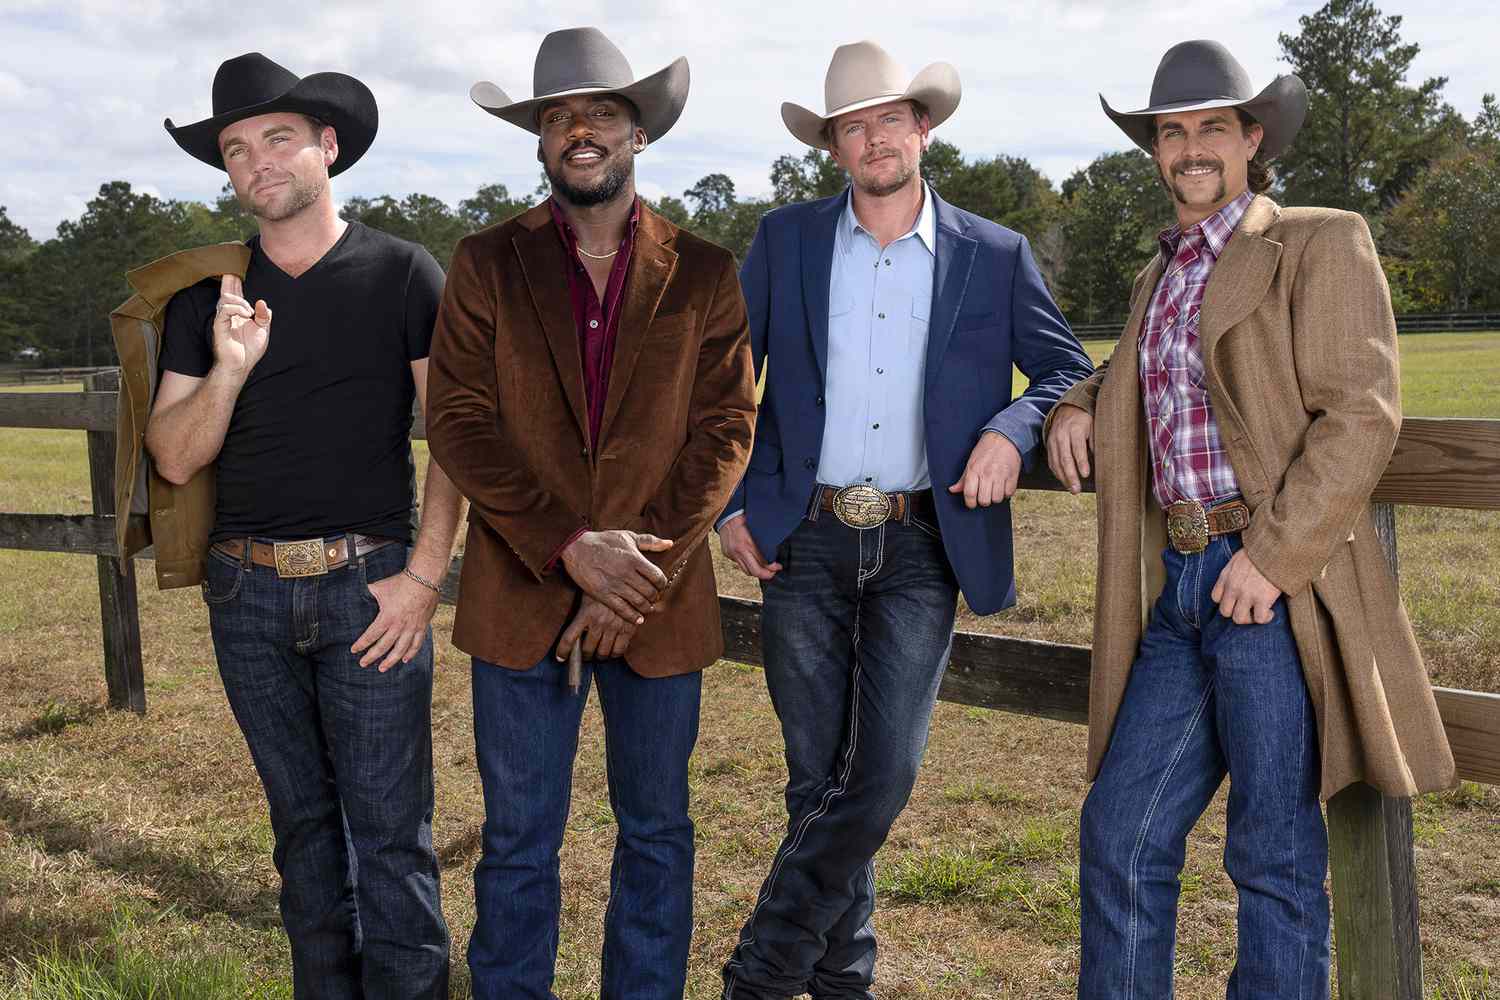 Meet the homestead-owning hunks looking for love on ‘Farmer Wants a Wife’